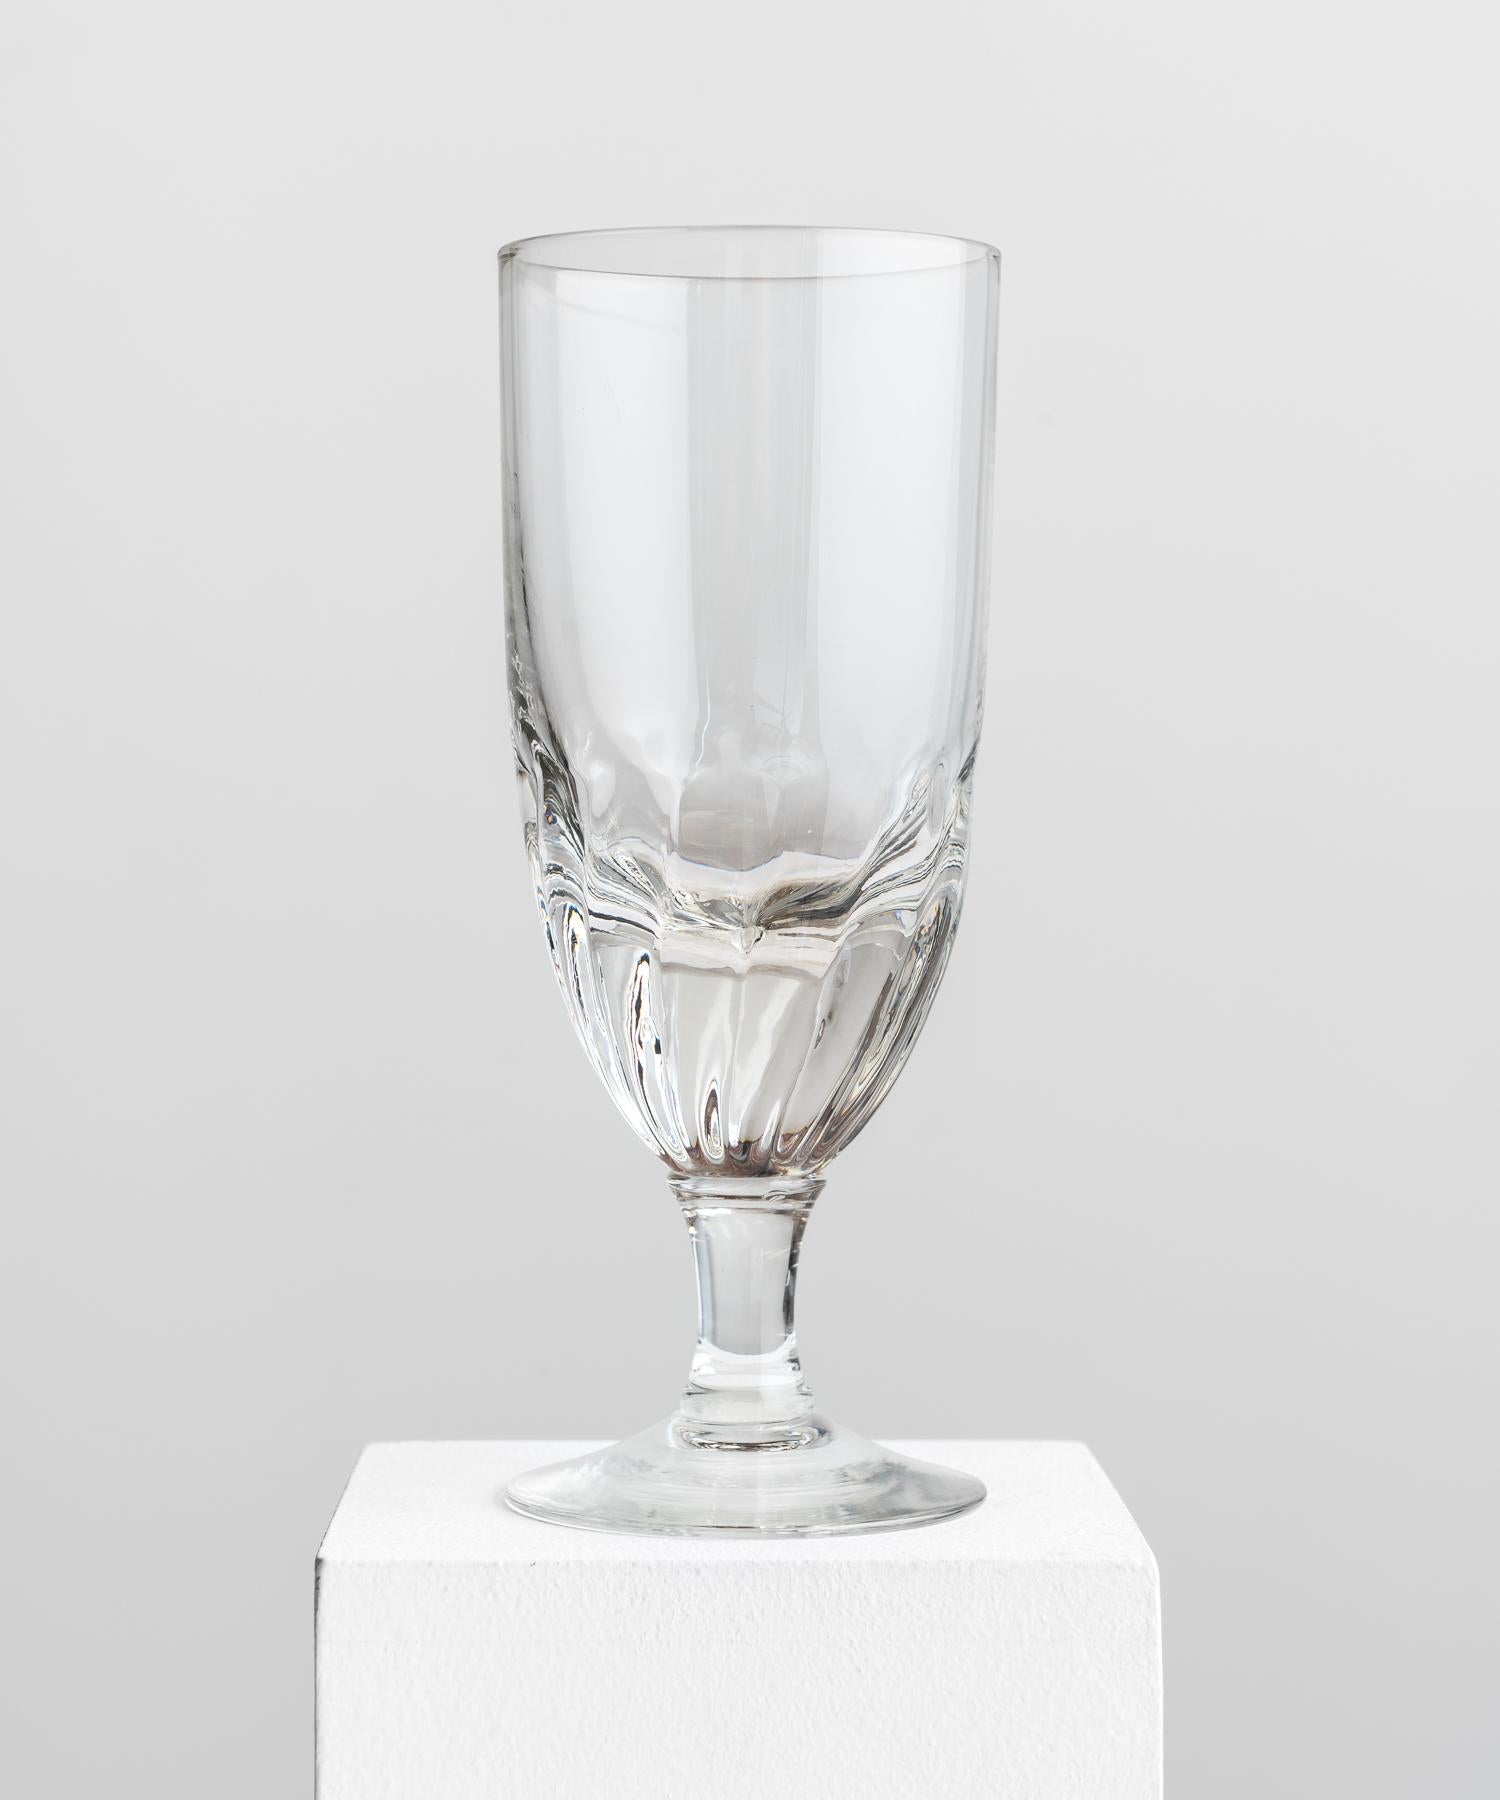 Crystal wine glasses, circa 1860

Elegant forms with solid base and detailed bottom half.